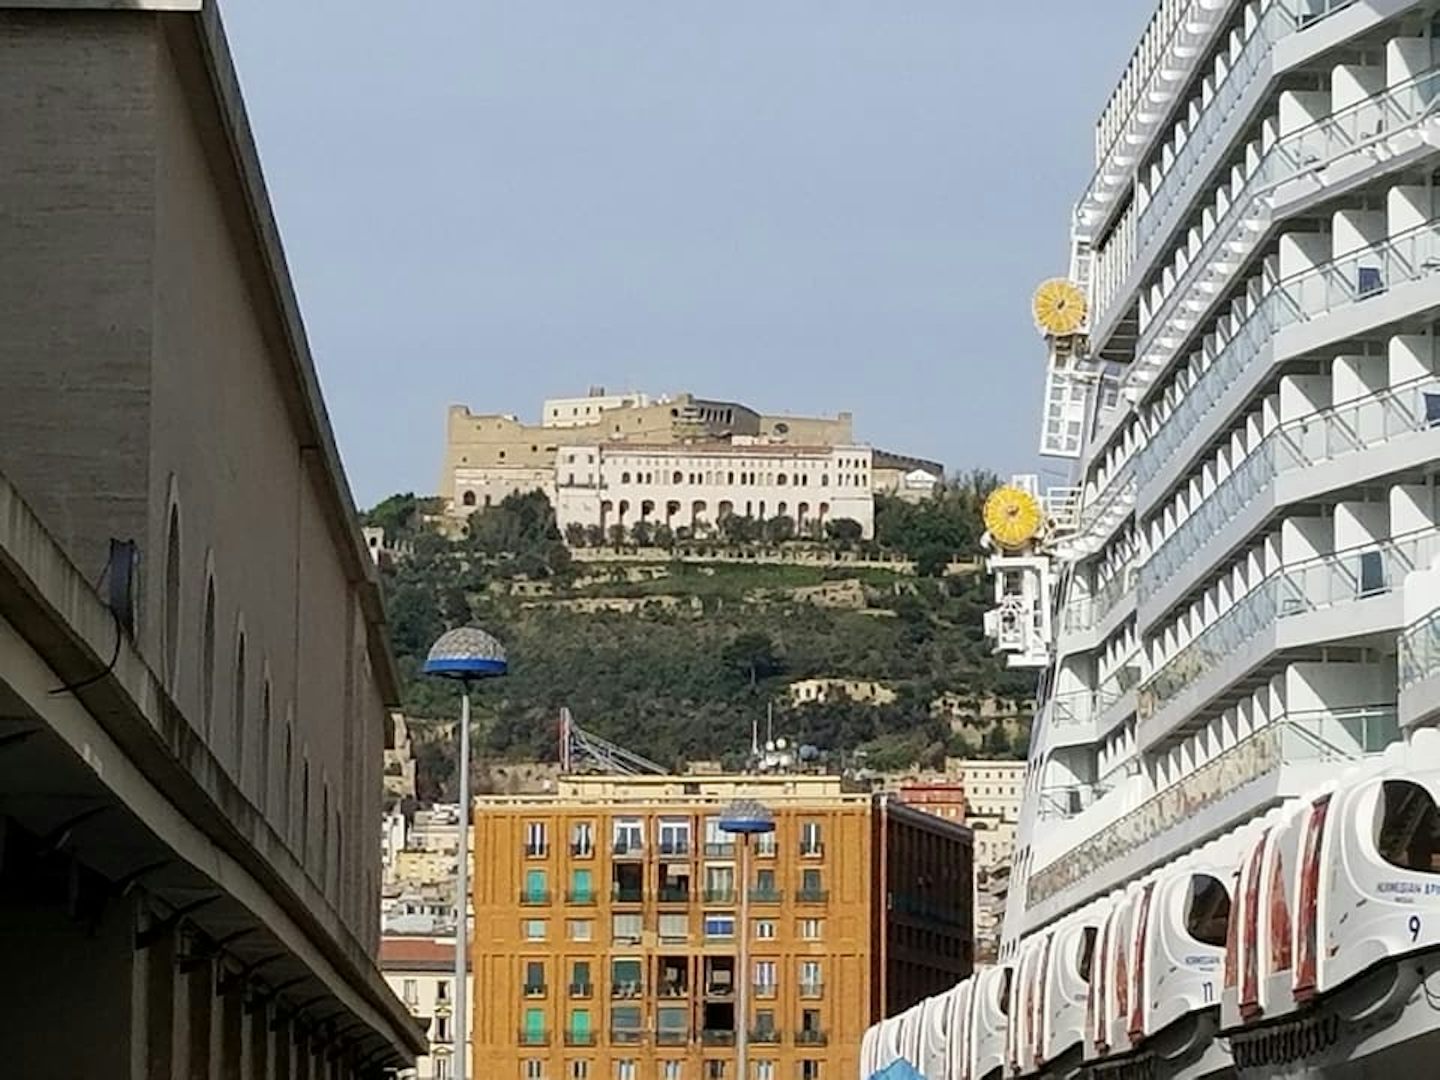 View of off the boat in Naples.